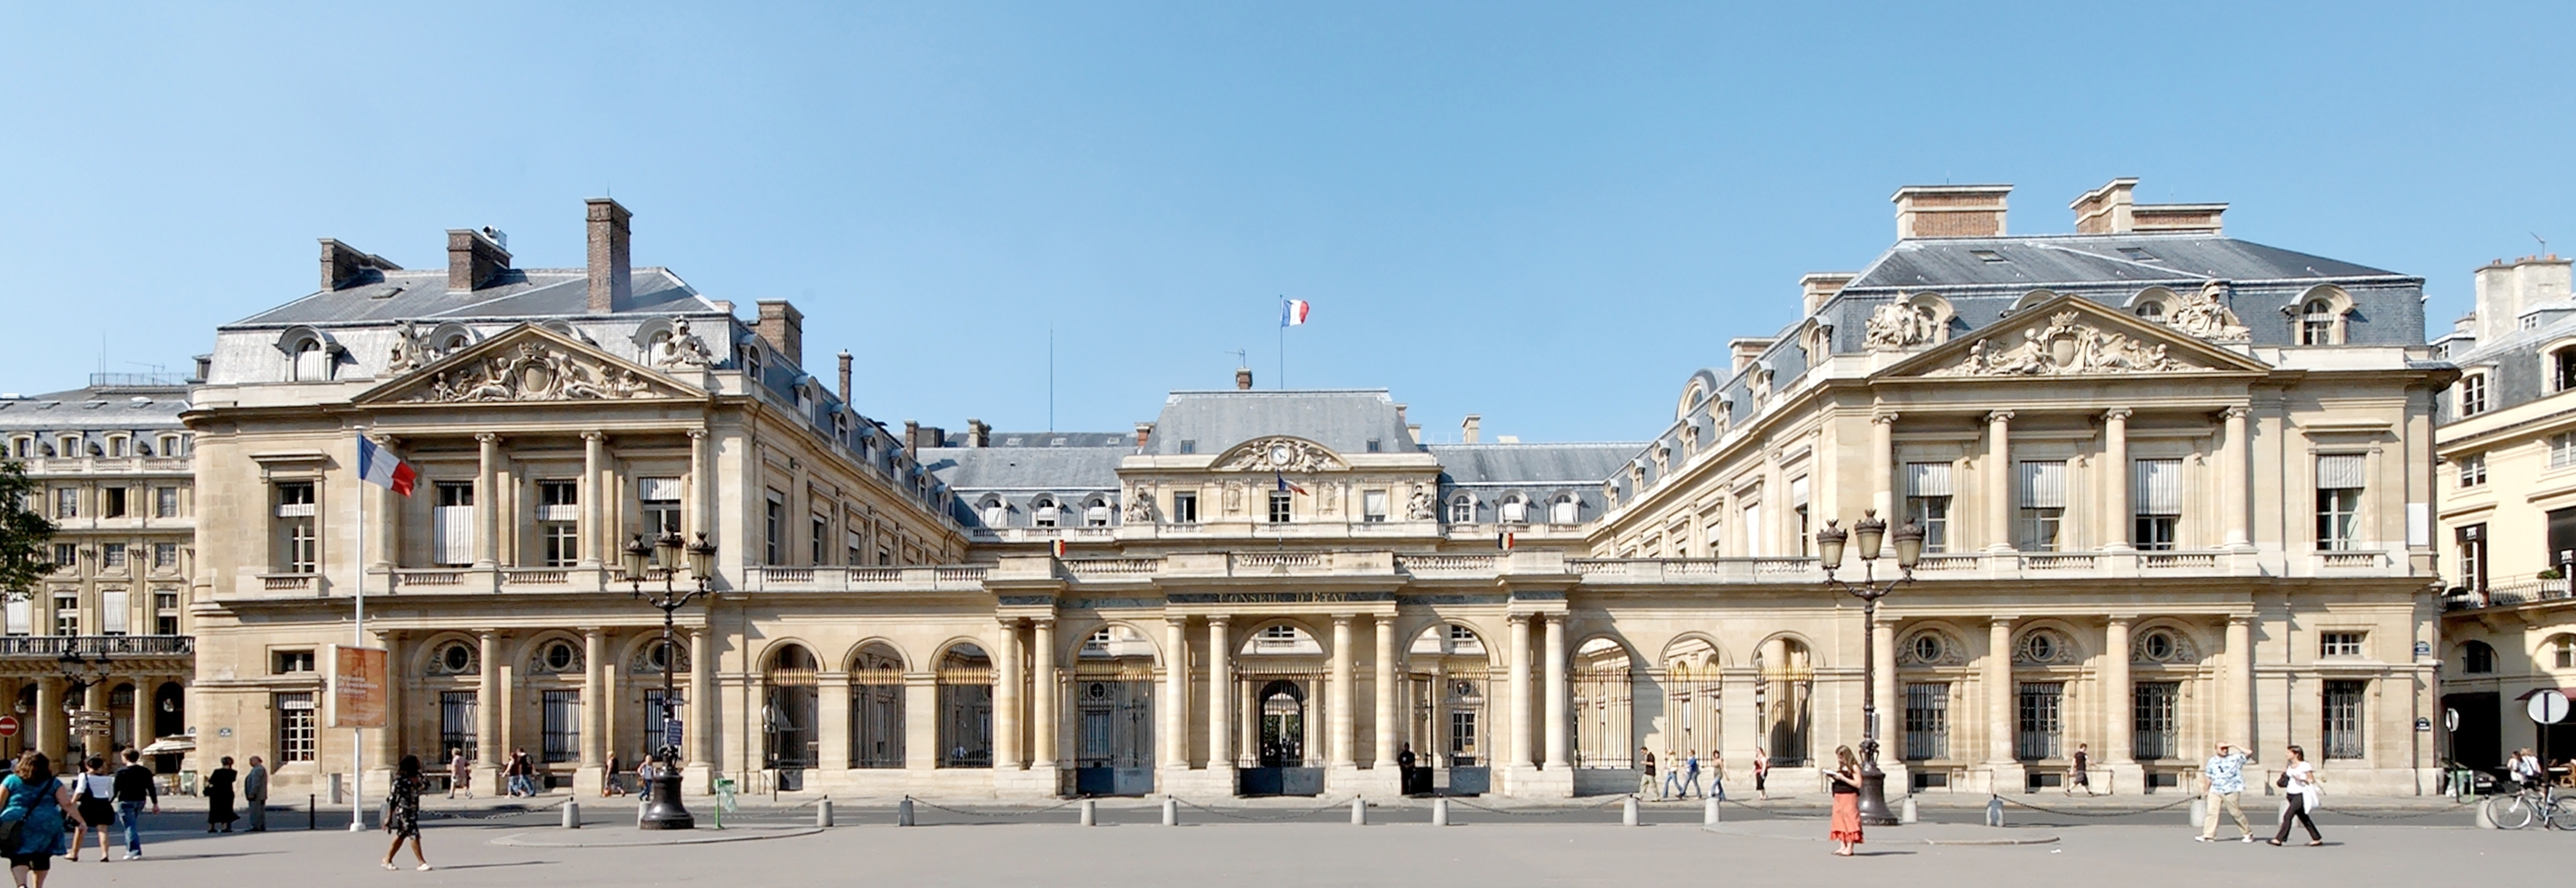 French Council of State - Marie-Lan Nguyen - Public Domain - Wikimedia Commons